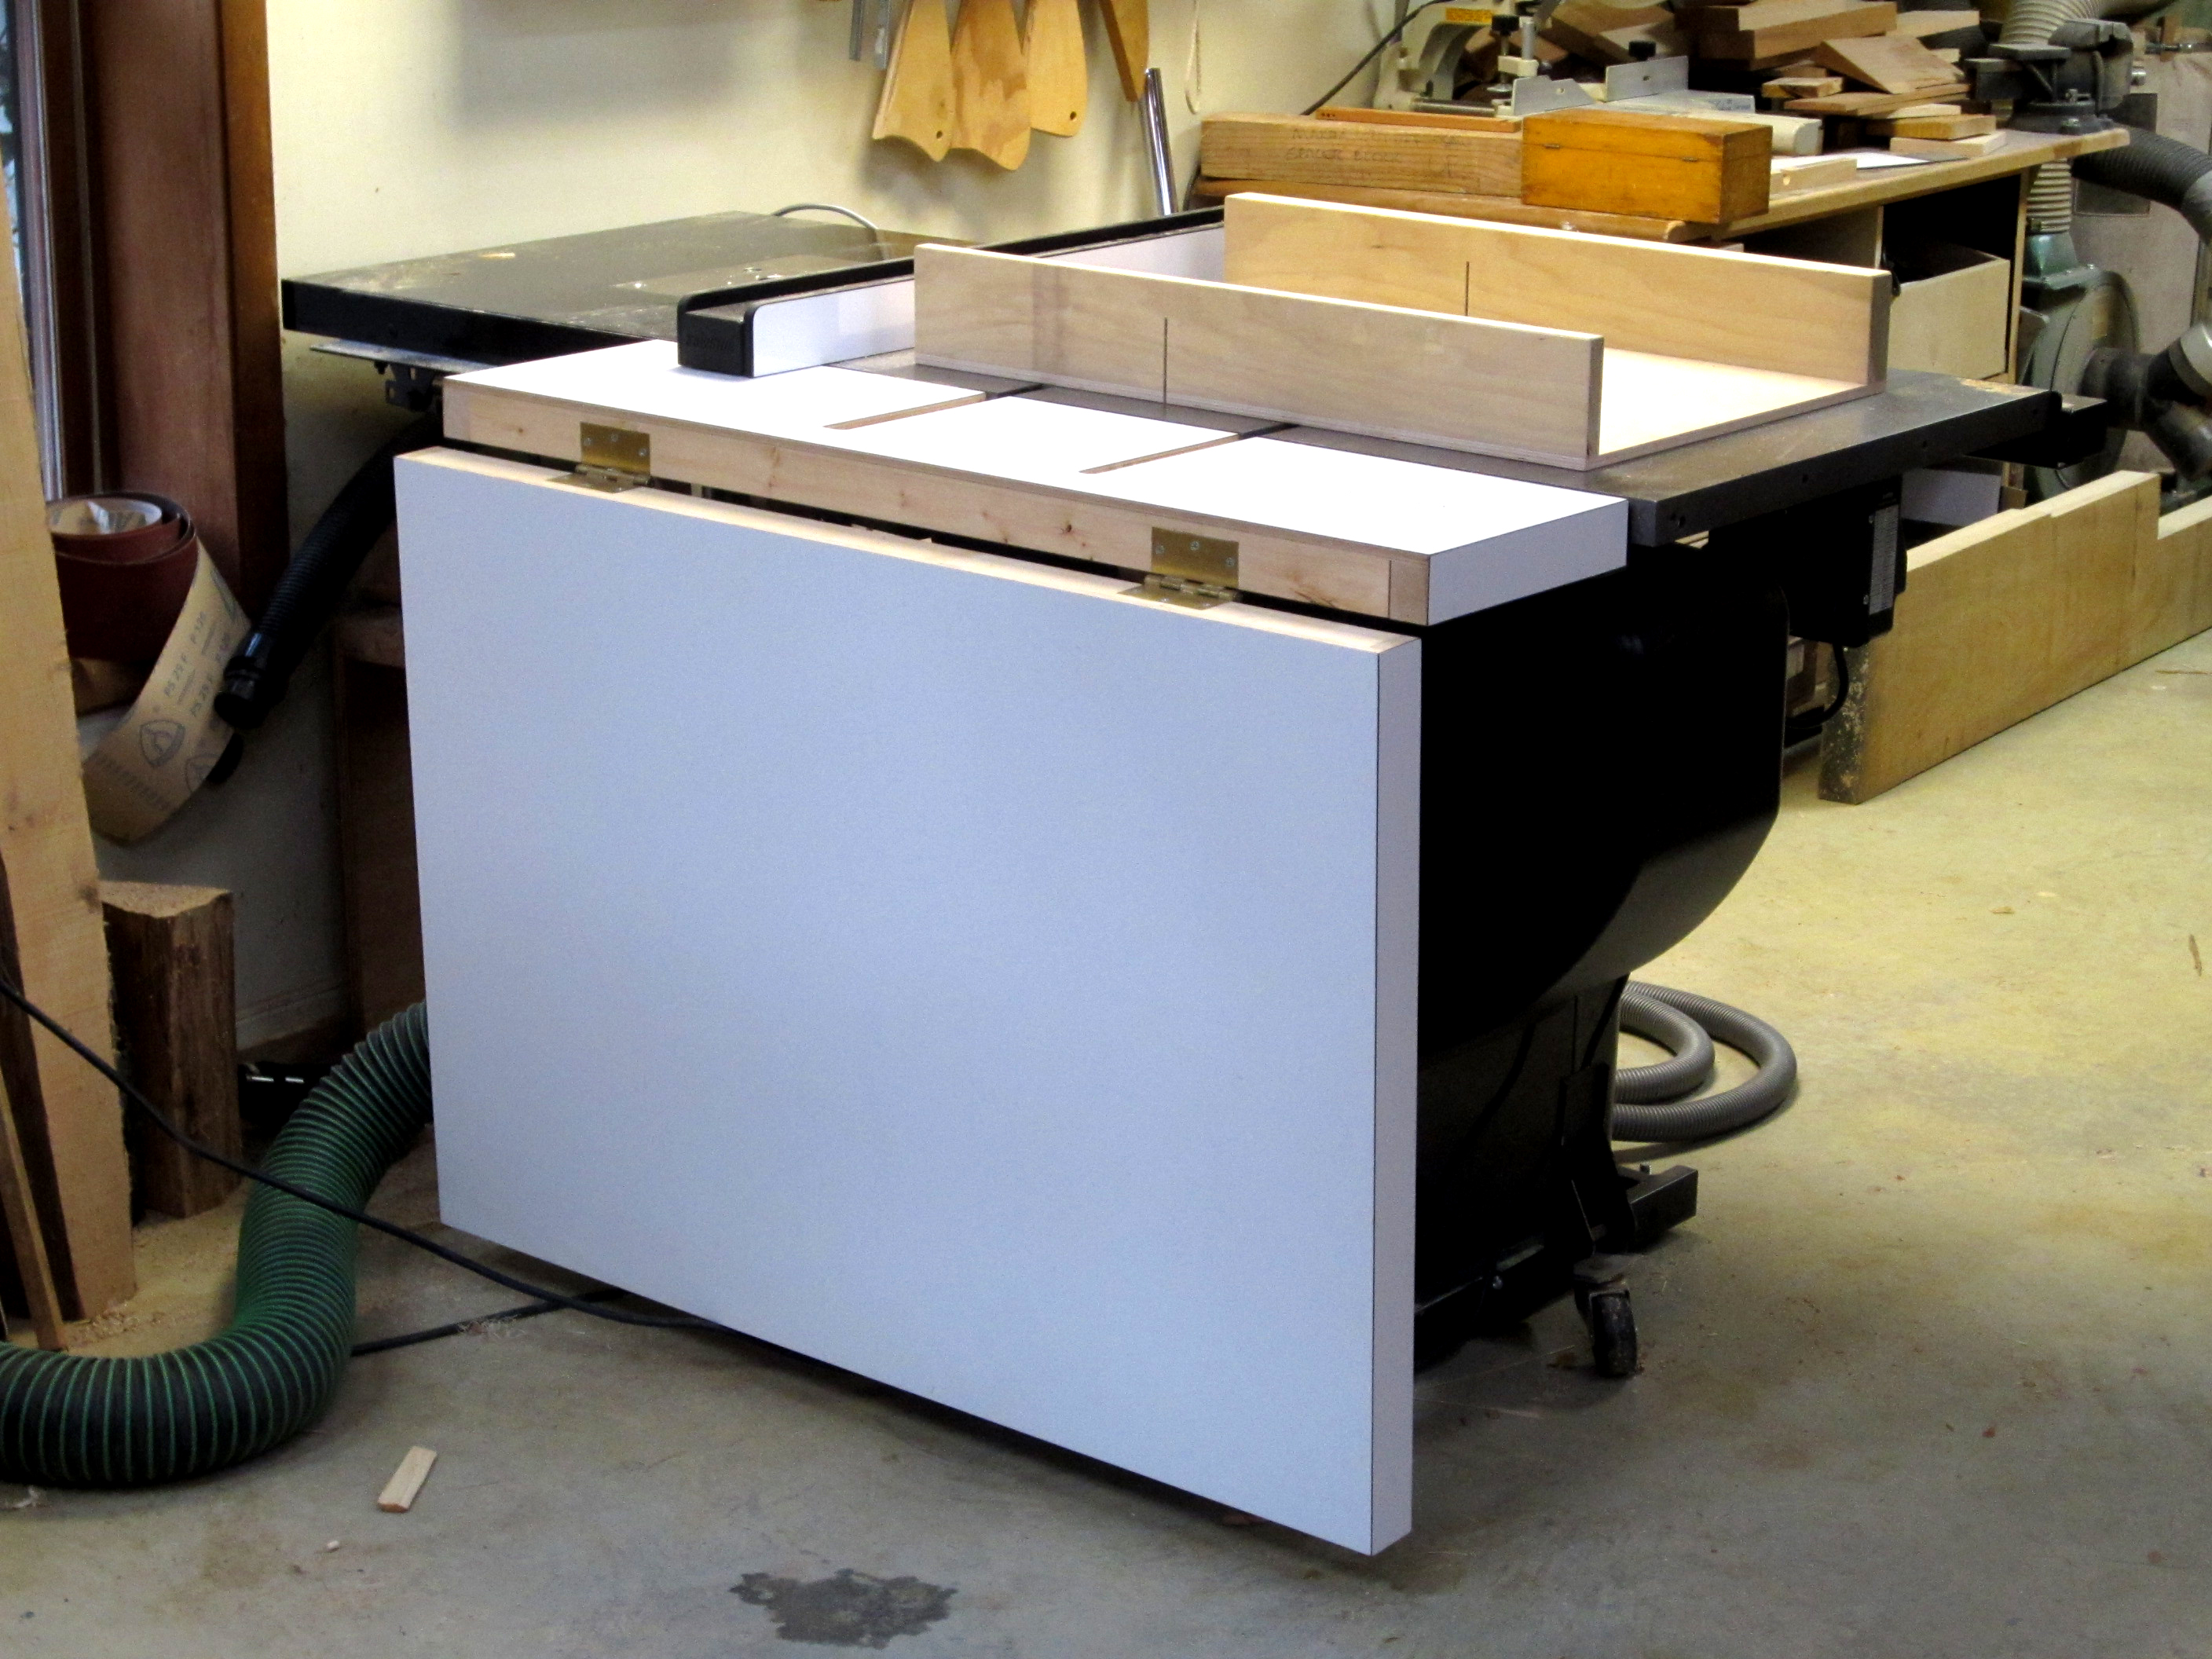  saw http world of wood blogspot com 2012 01 raised panels on table saw